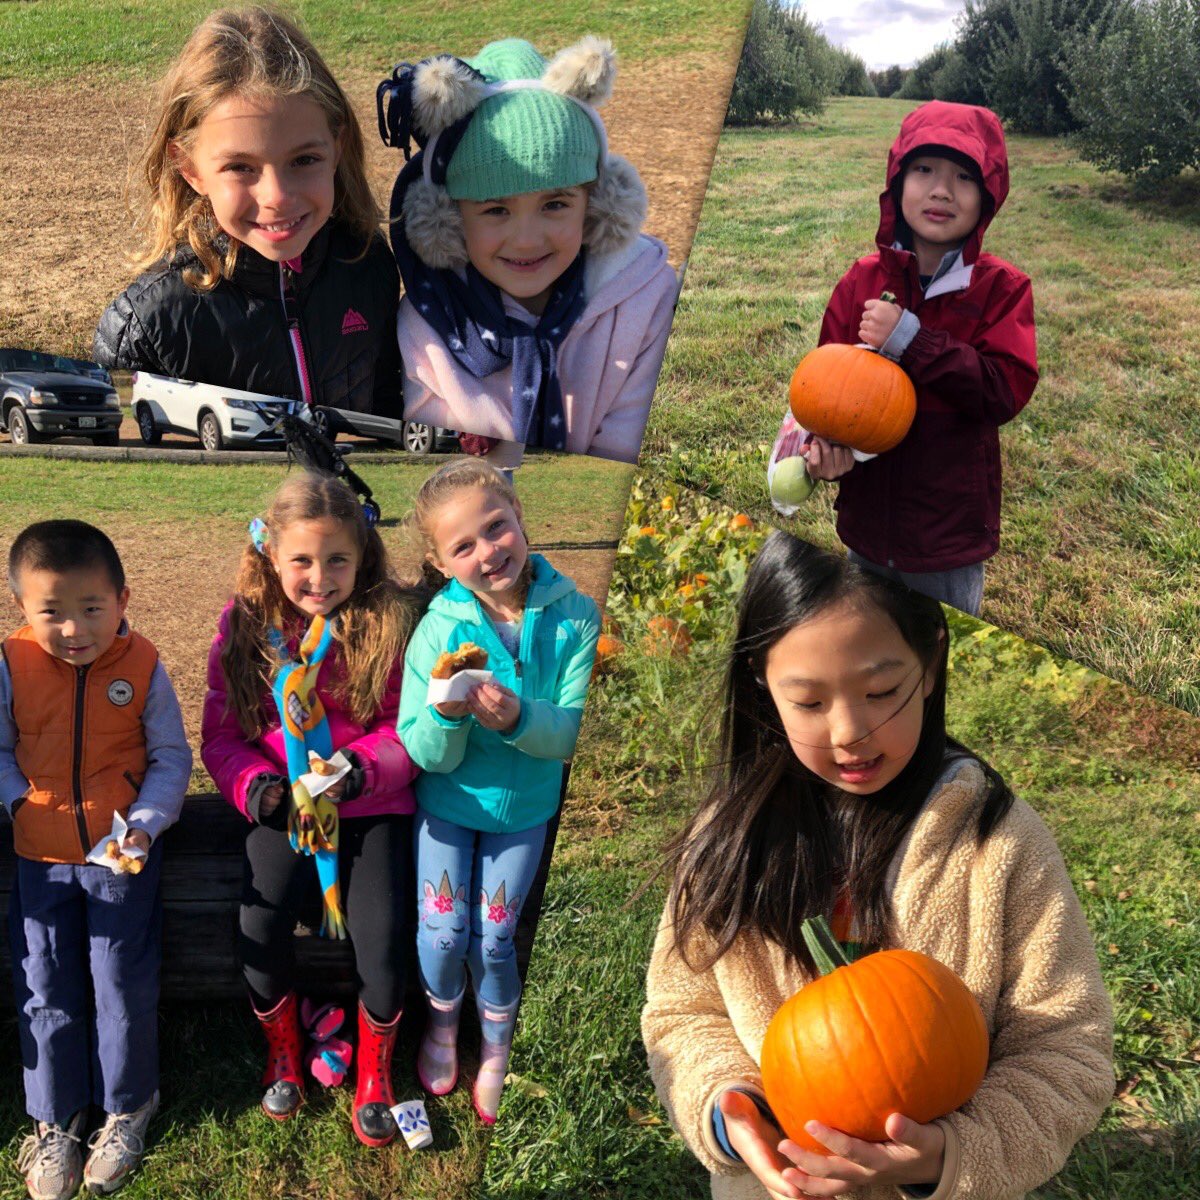 We had an awesome time at the farm today!!! What a great class trip! #firstgradefriends #TeamGreen #Harrisonfamily #applelifecycle #pumpkinlifecycle @HarrisonHawks90